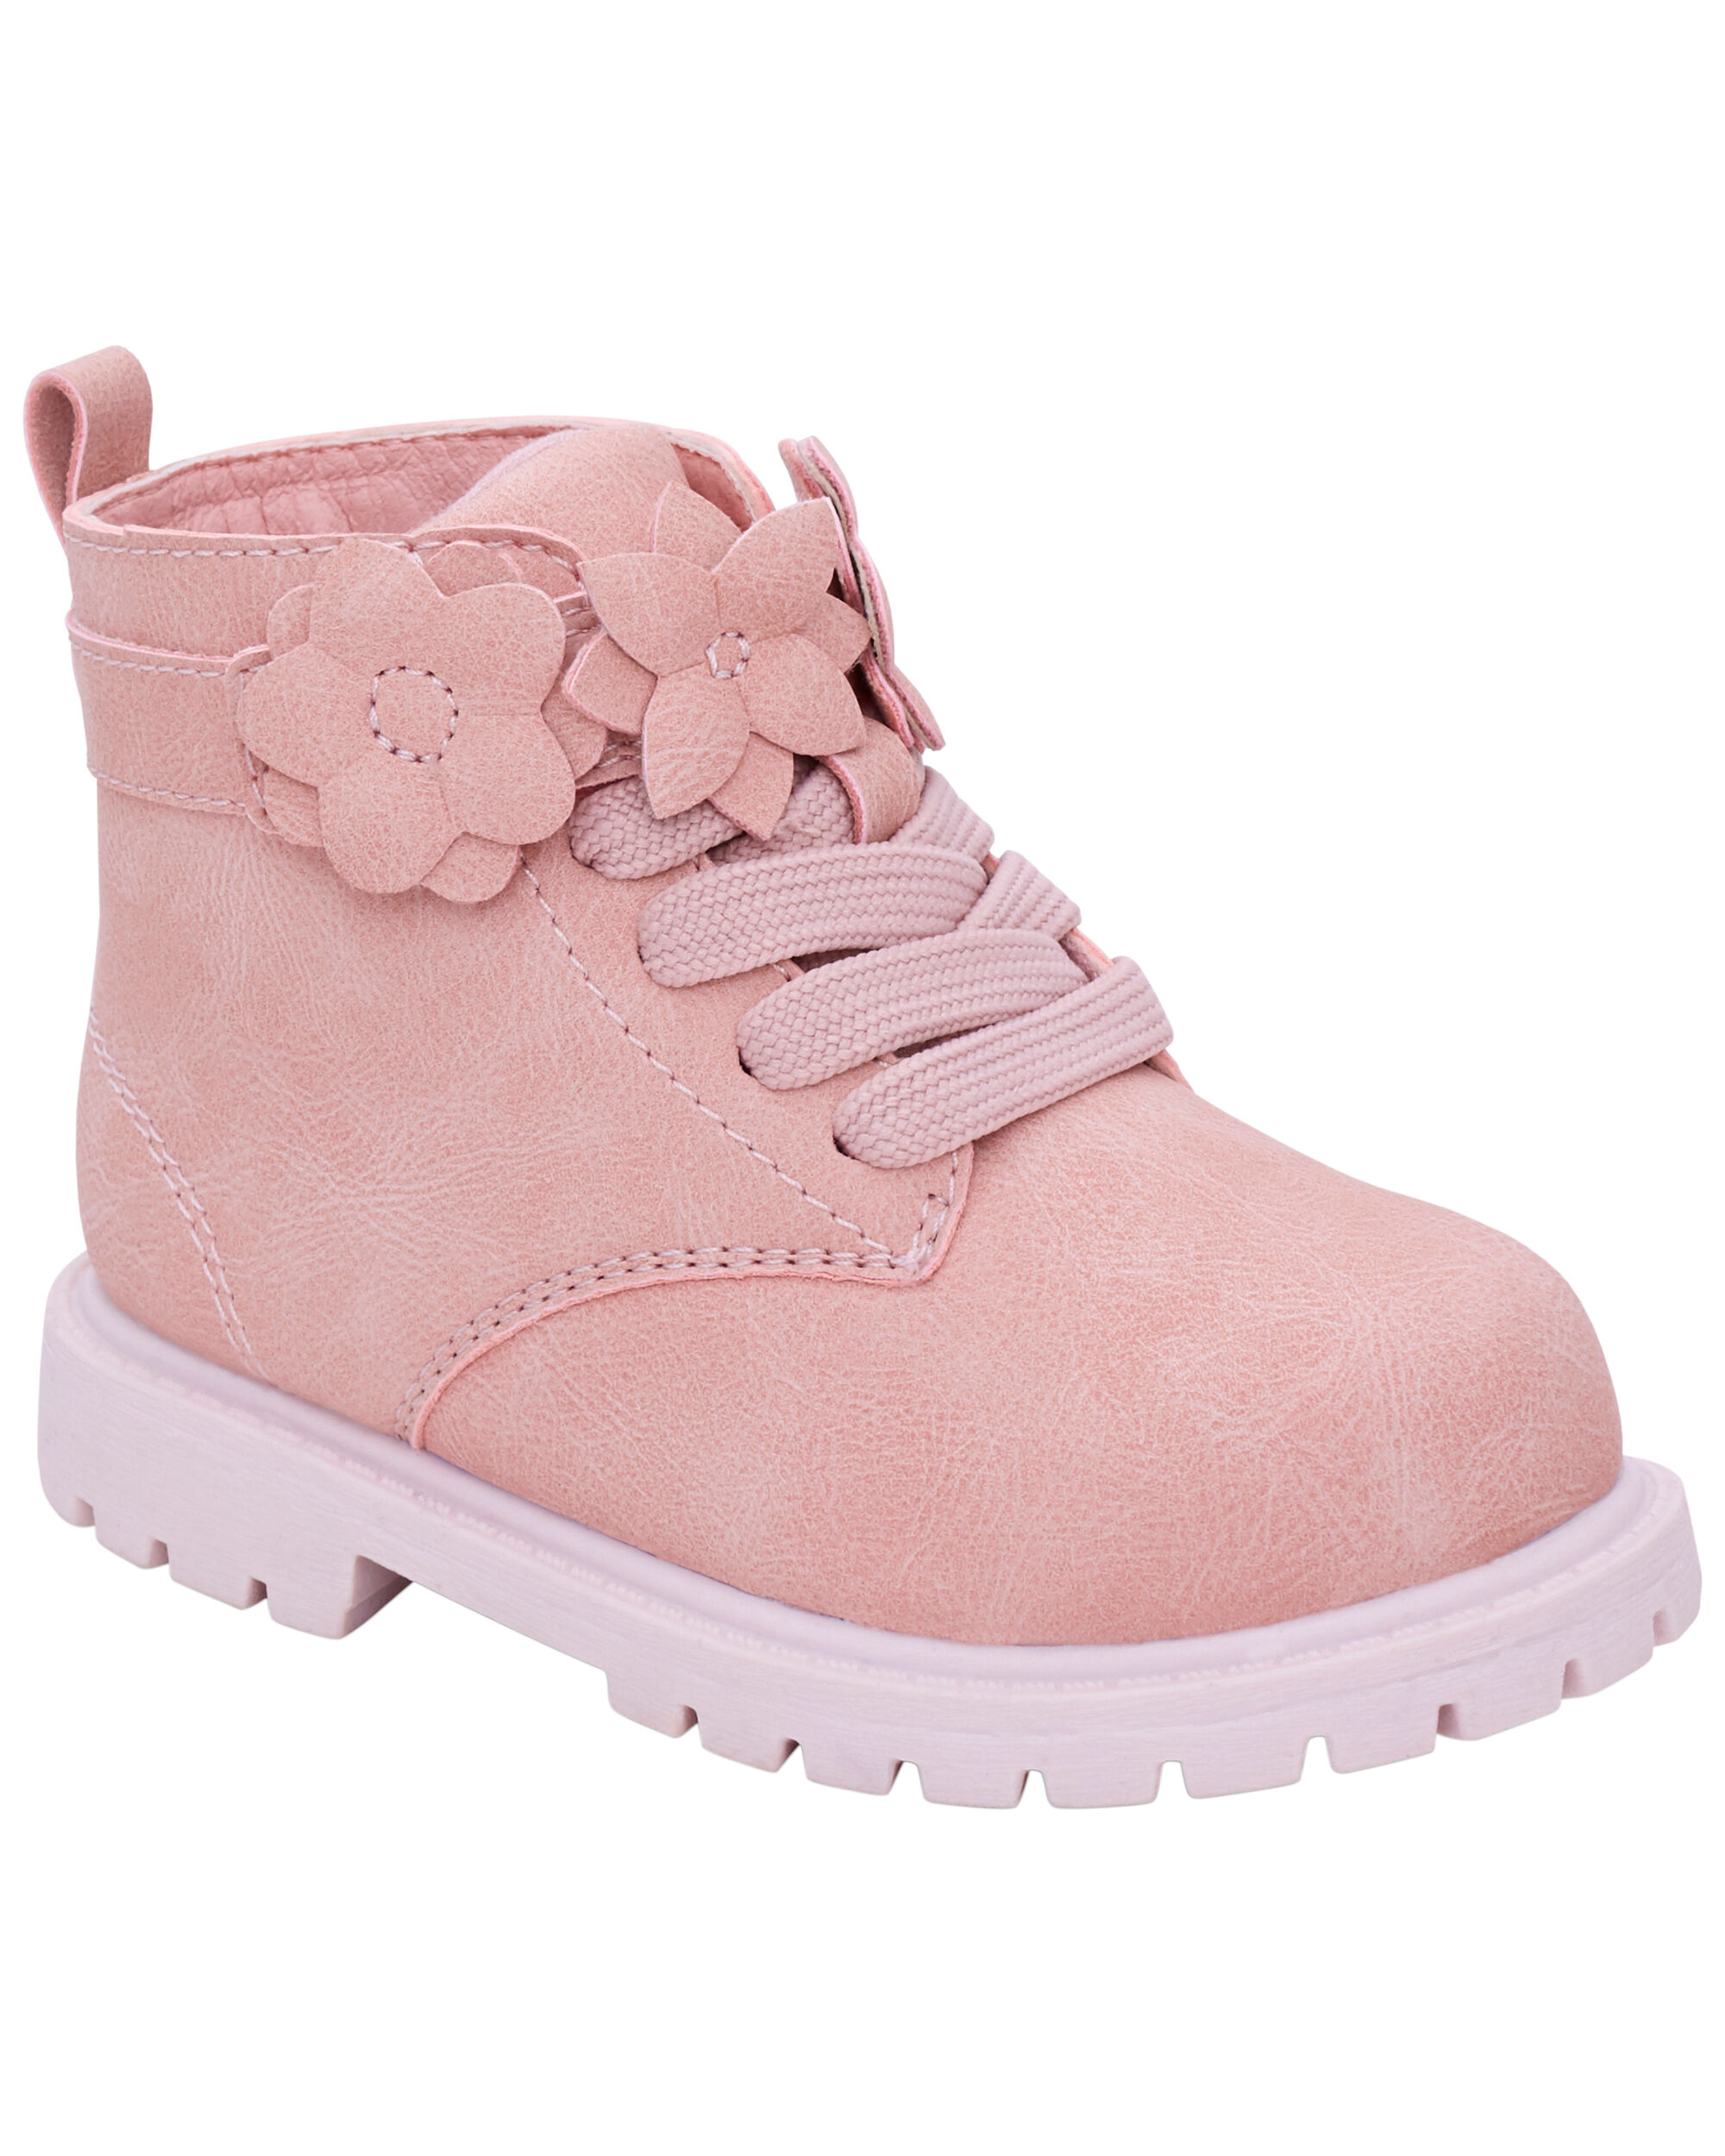 Toddler Carters High-Top Boots